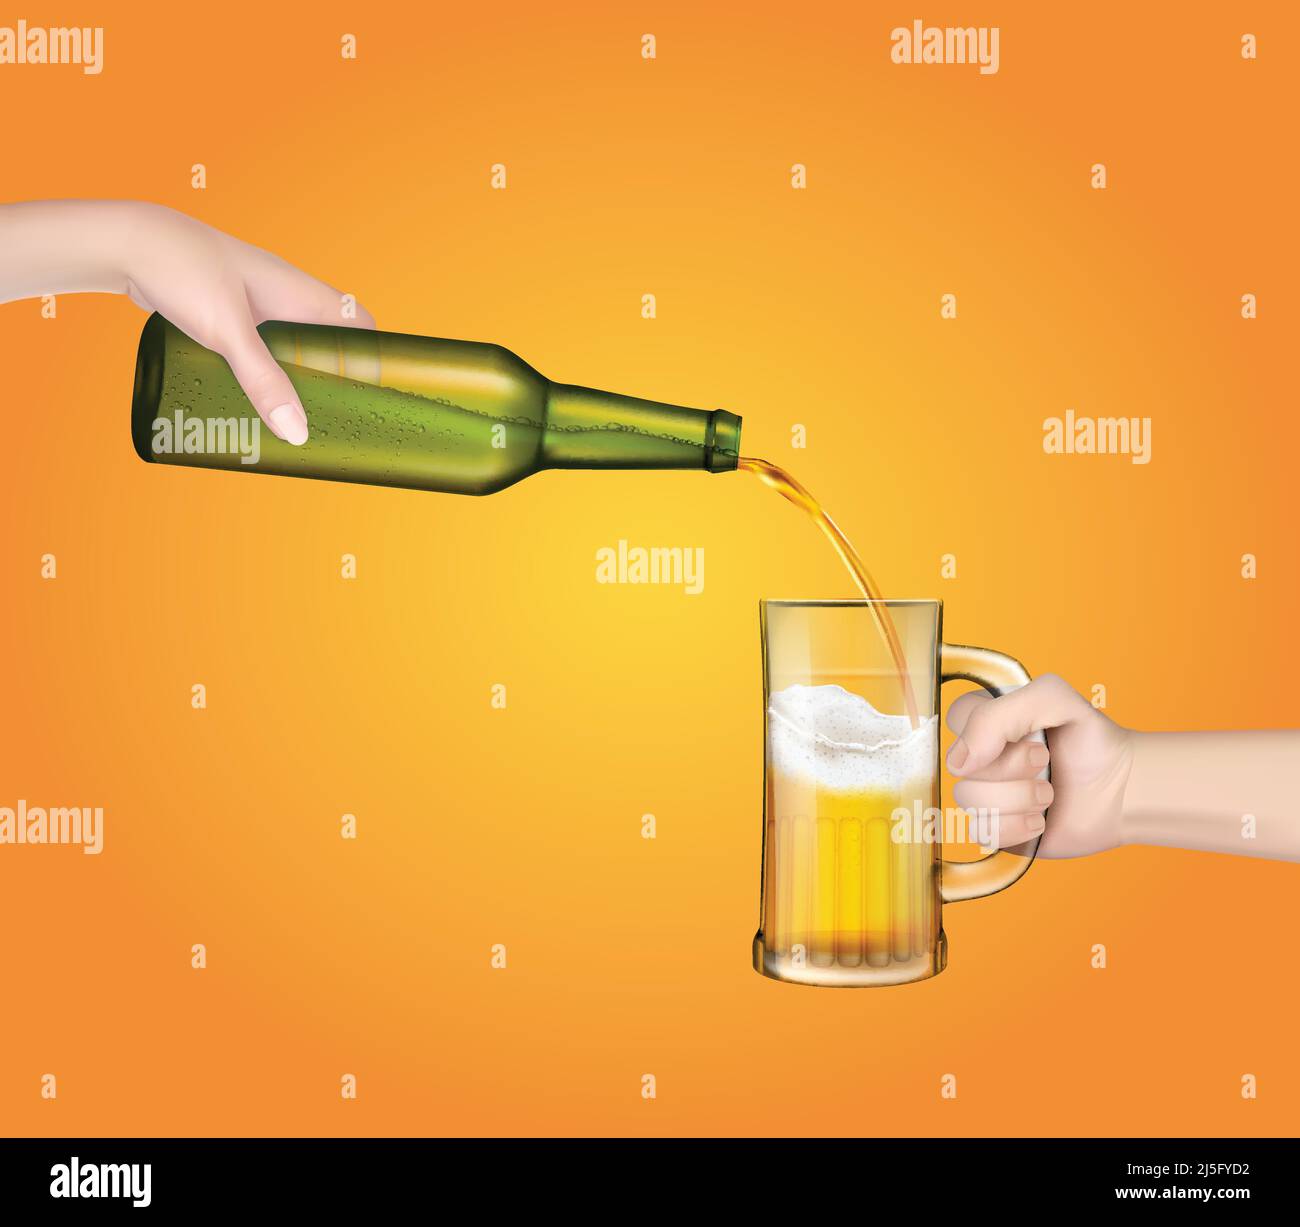 Vector illustration of a cold barley beer pouring from a bottle into a transparent glass in a realistic style. Stock Vector